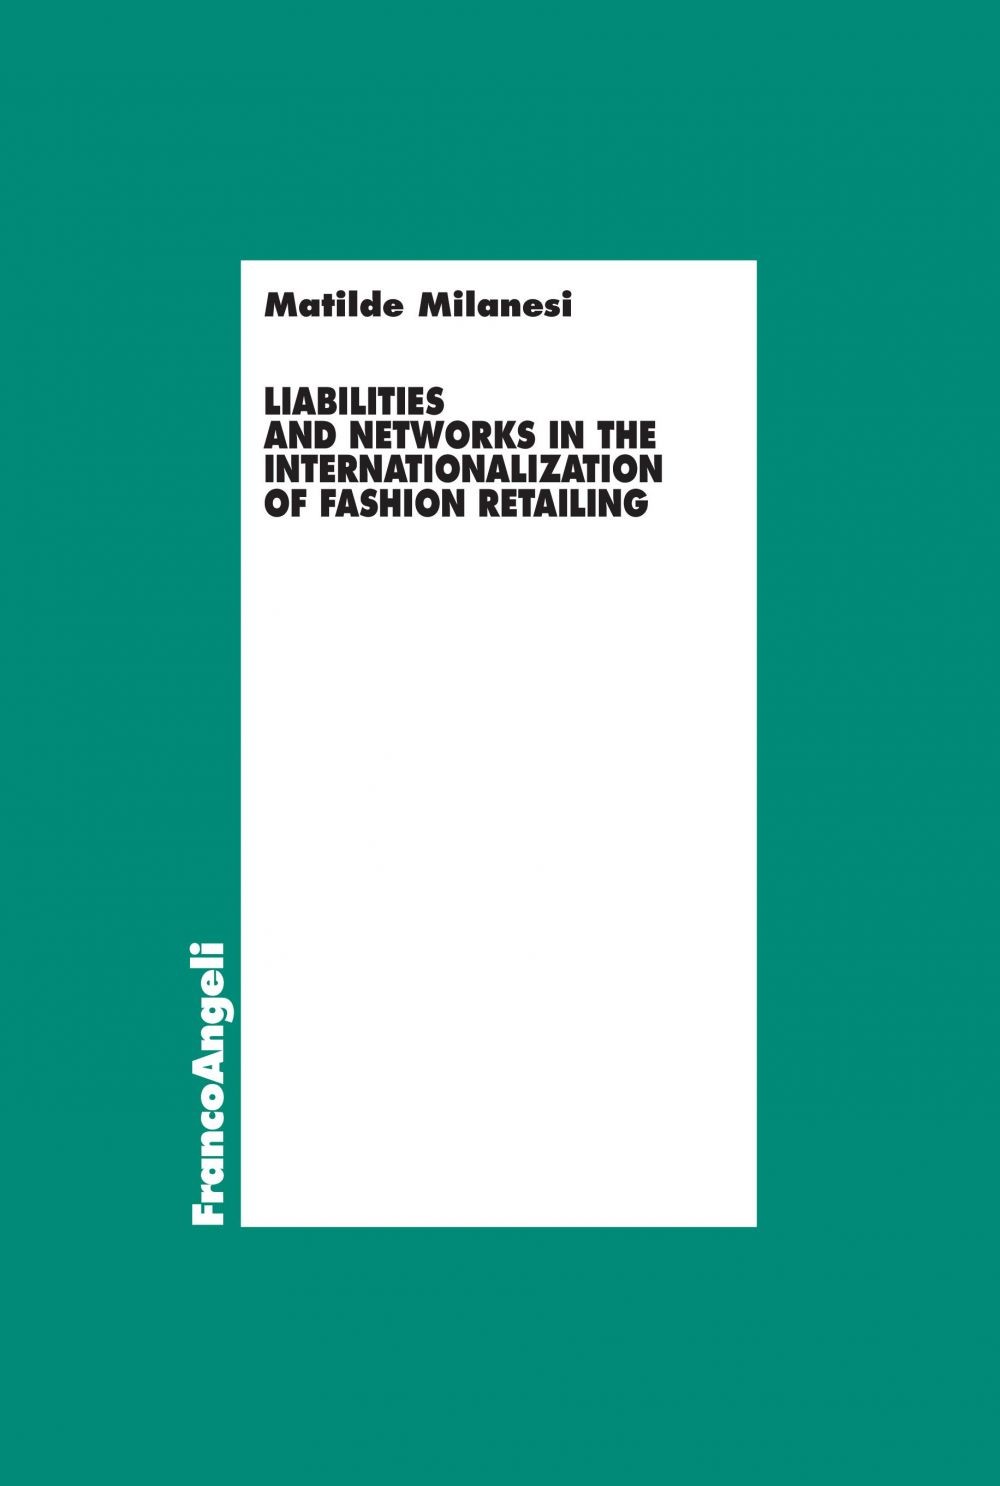 Liabilities and networks in the internationalization of fashion retailing - Librerie.coop